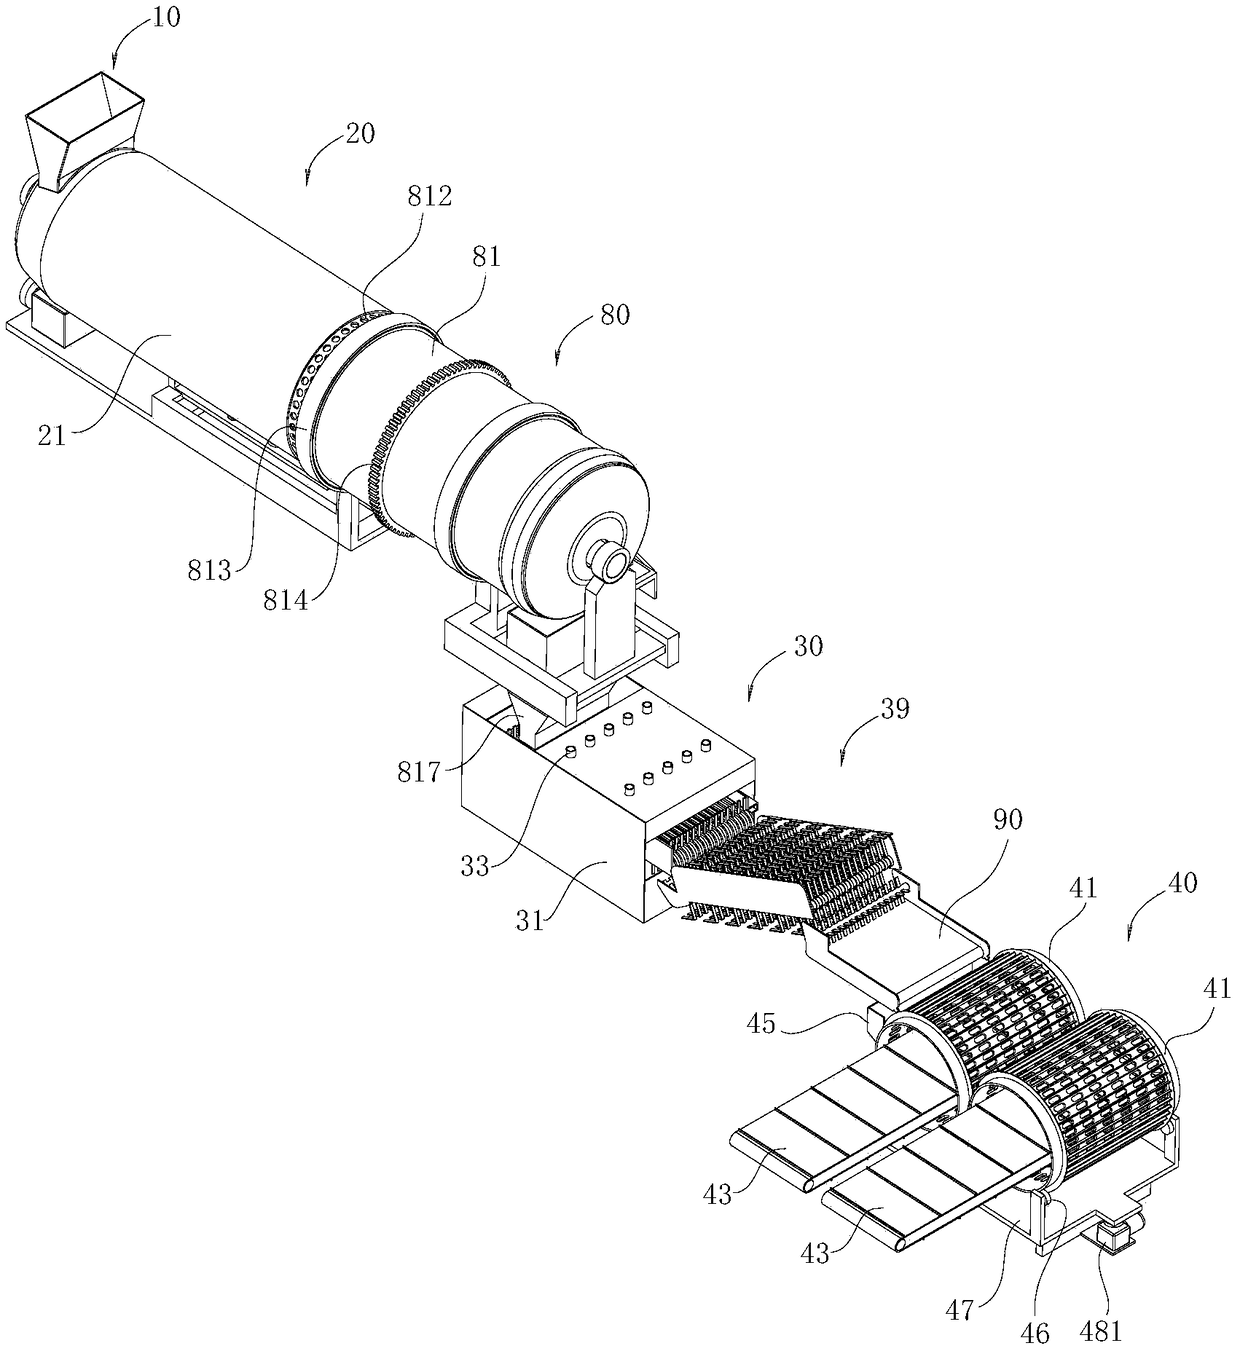 Shell and meat separating device